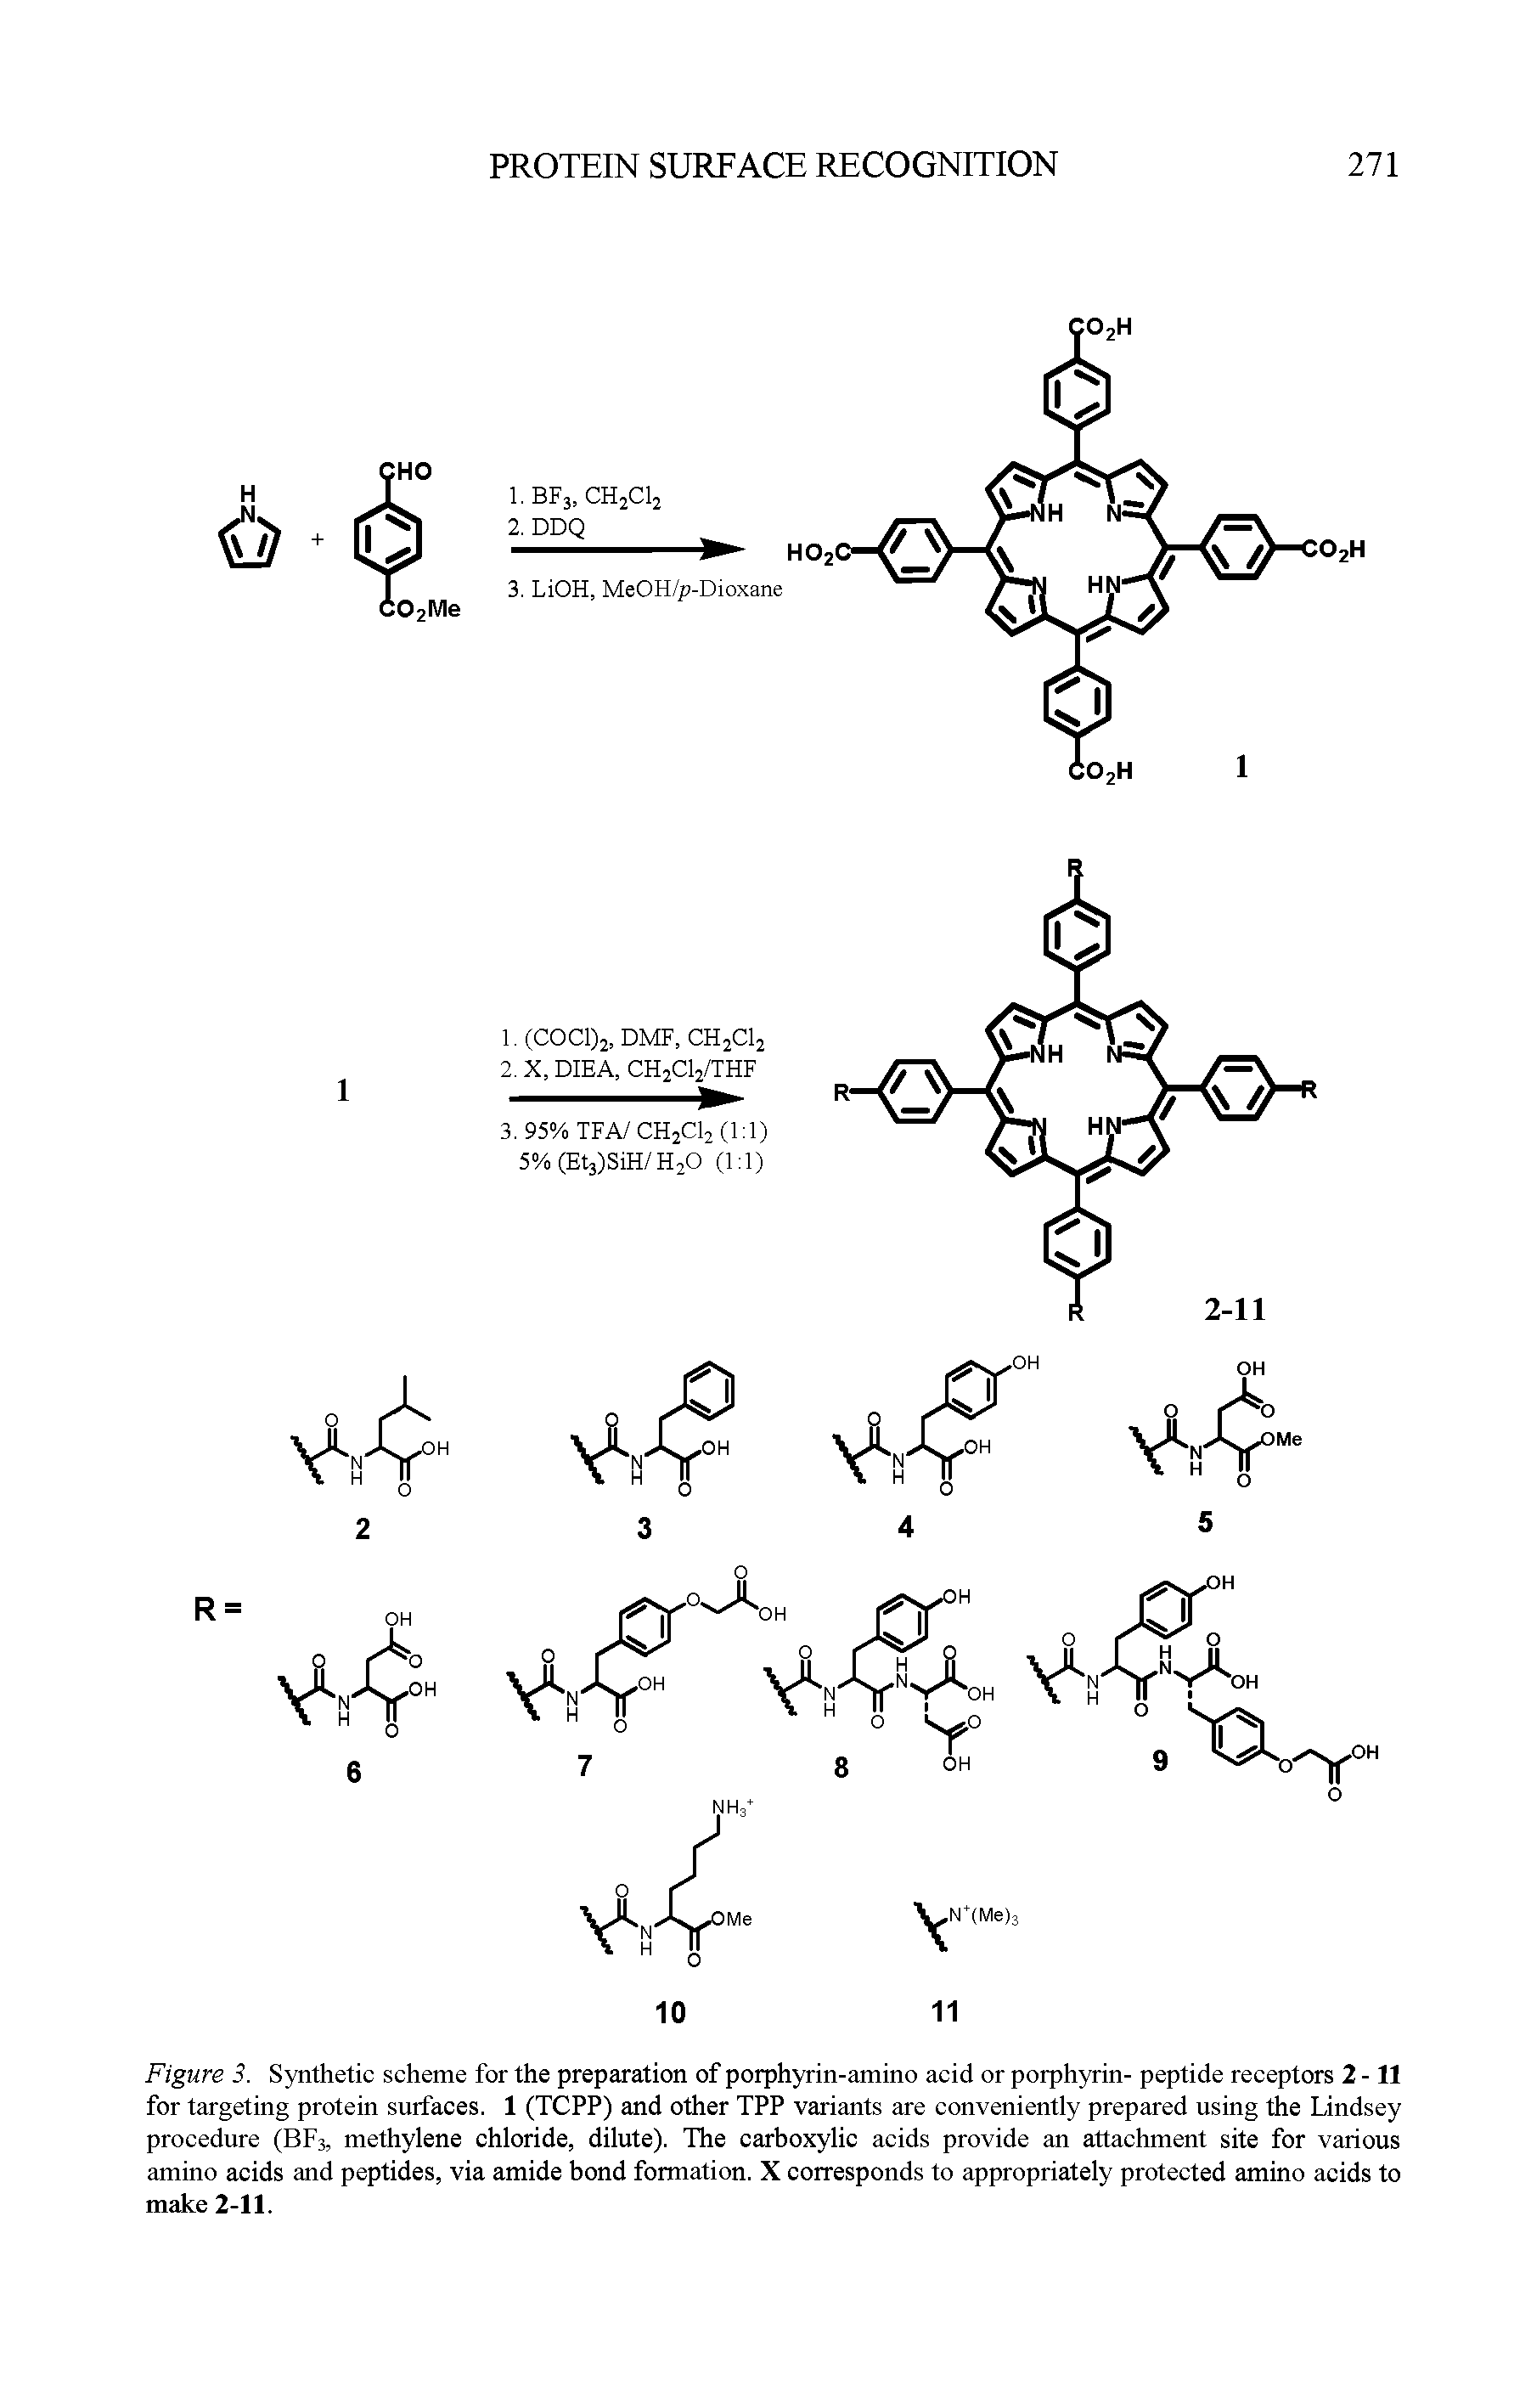 Figure 3. Synthetic scheme for the preparation of porphyrin-amino acid or porphyrin- peptide receptors 2-11 for targeting protein surfaces. 1 (TCPP) and other TPP variants are conveniently prepared using the Lindsey procedure (BF3, methylene chloride, dilute). The carboxylic acids provide an attachment site for various amino acids and peptides, via amide bond formation. X corresponds to appropriately protected amino acids to make 2-11.